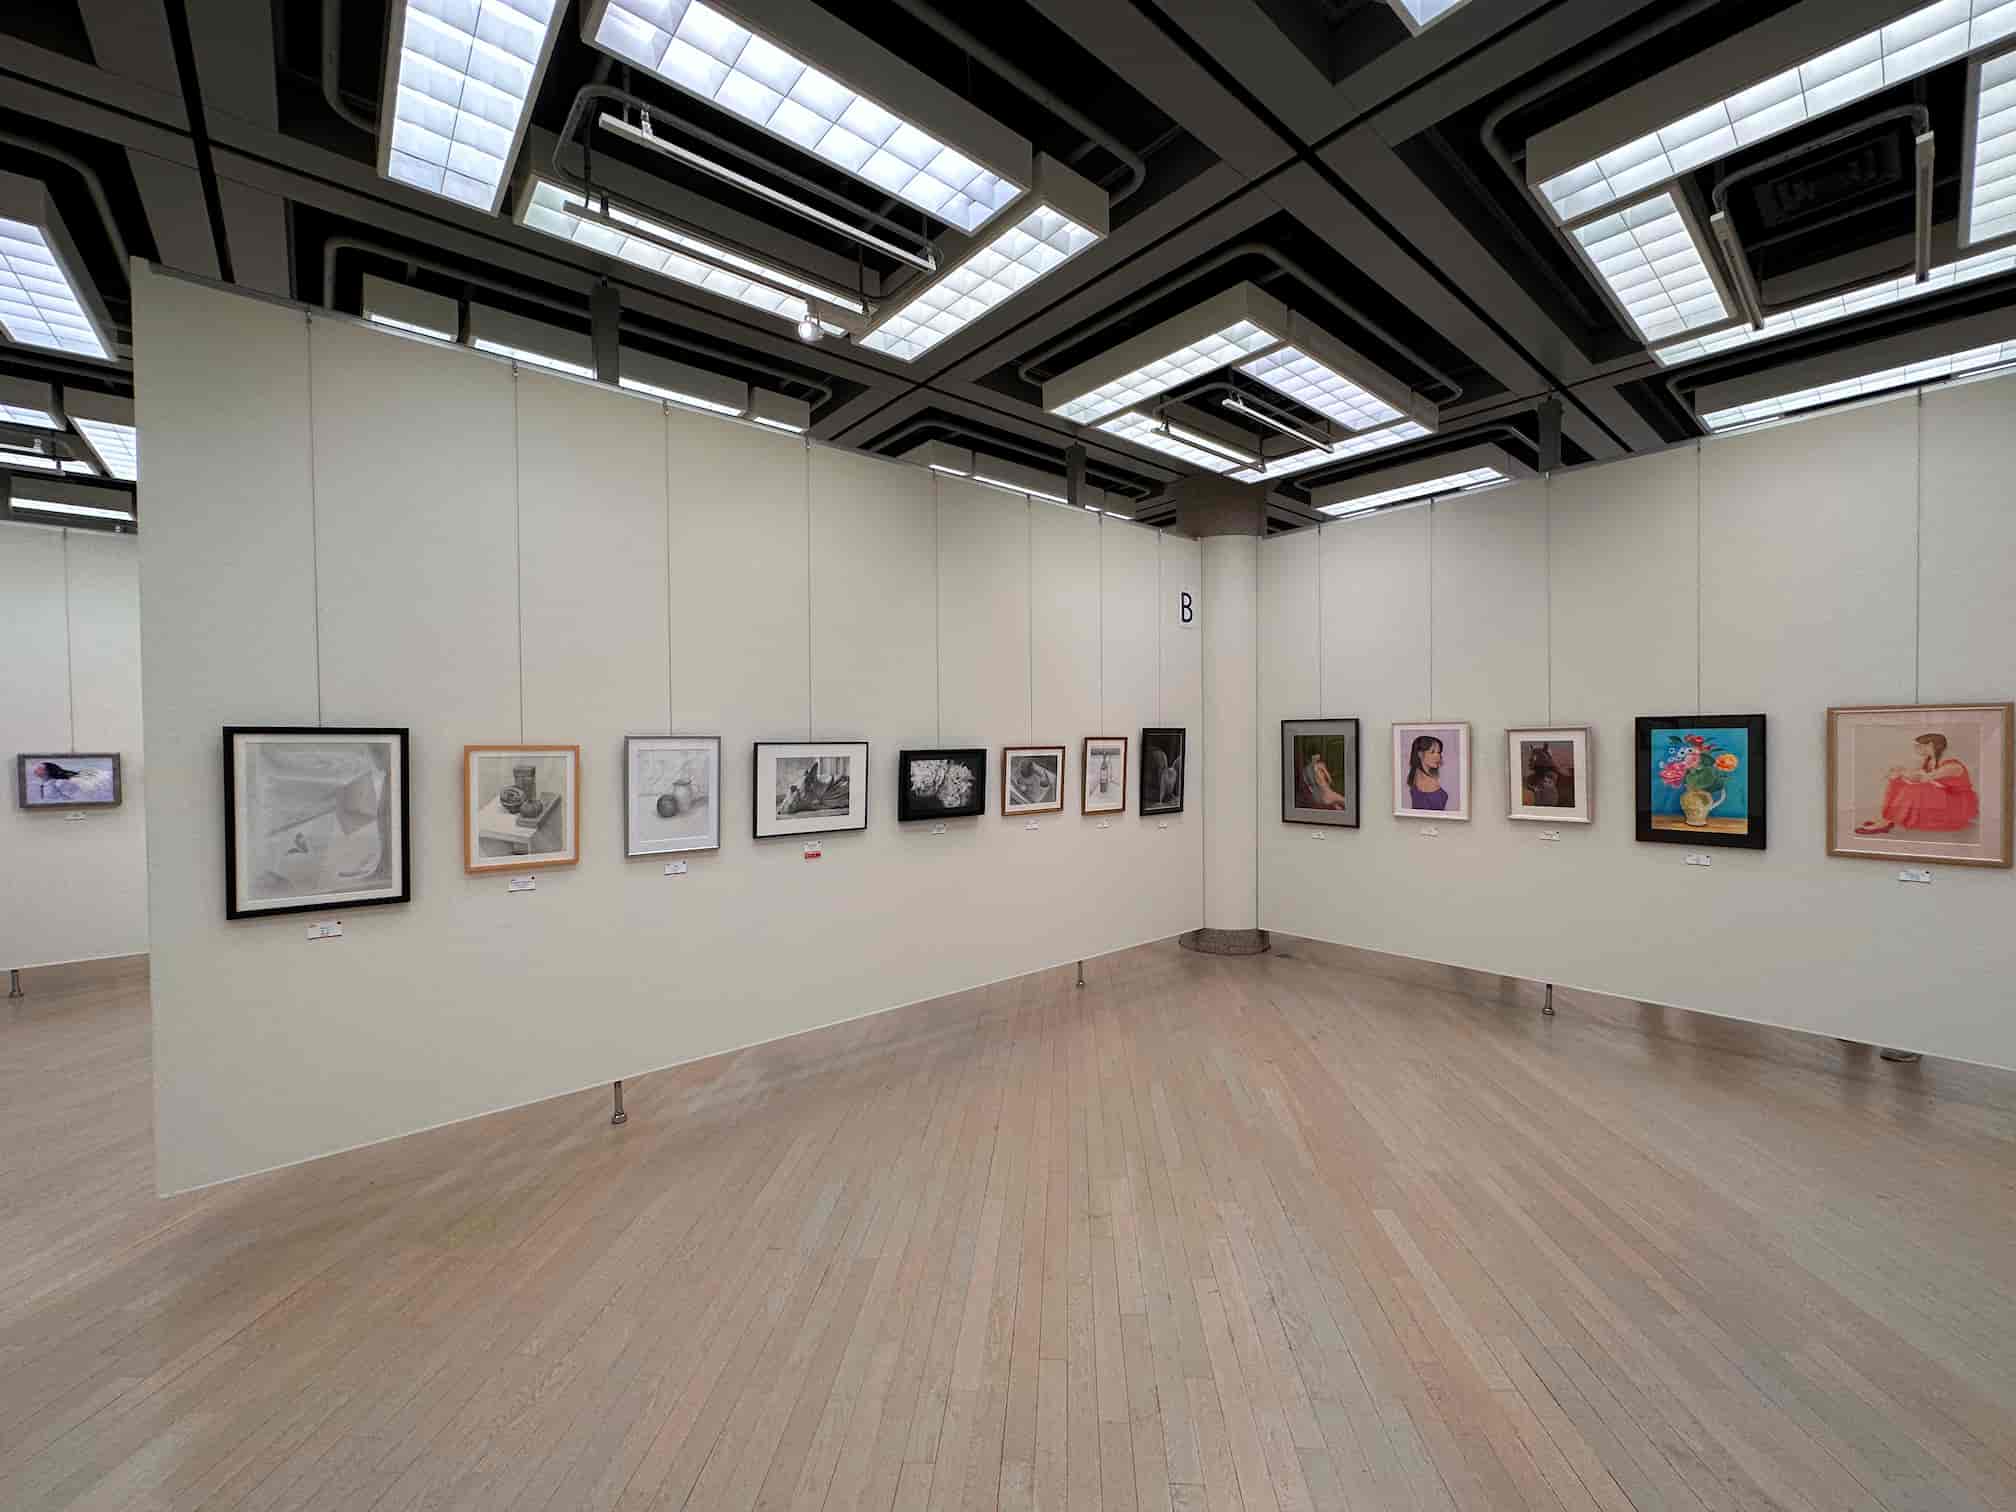 Art exhibition space with a wall dedicated to graphite drawings